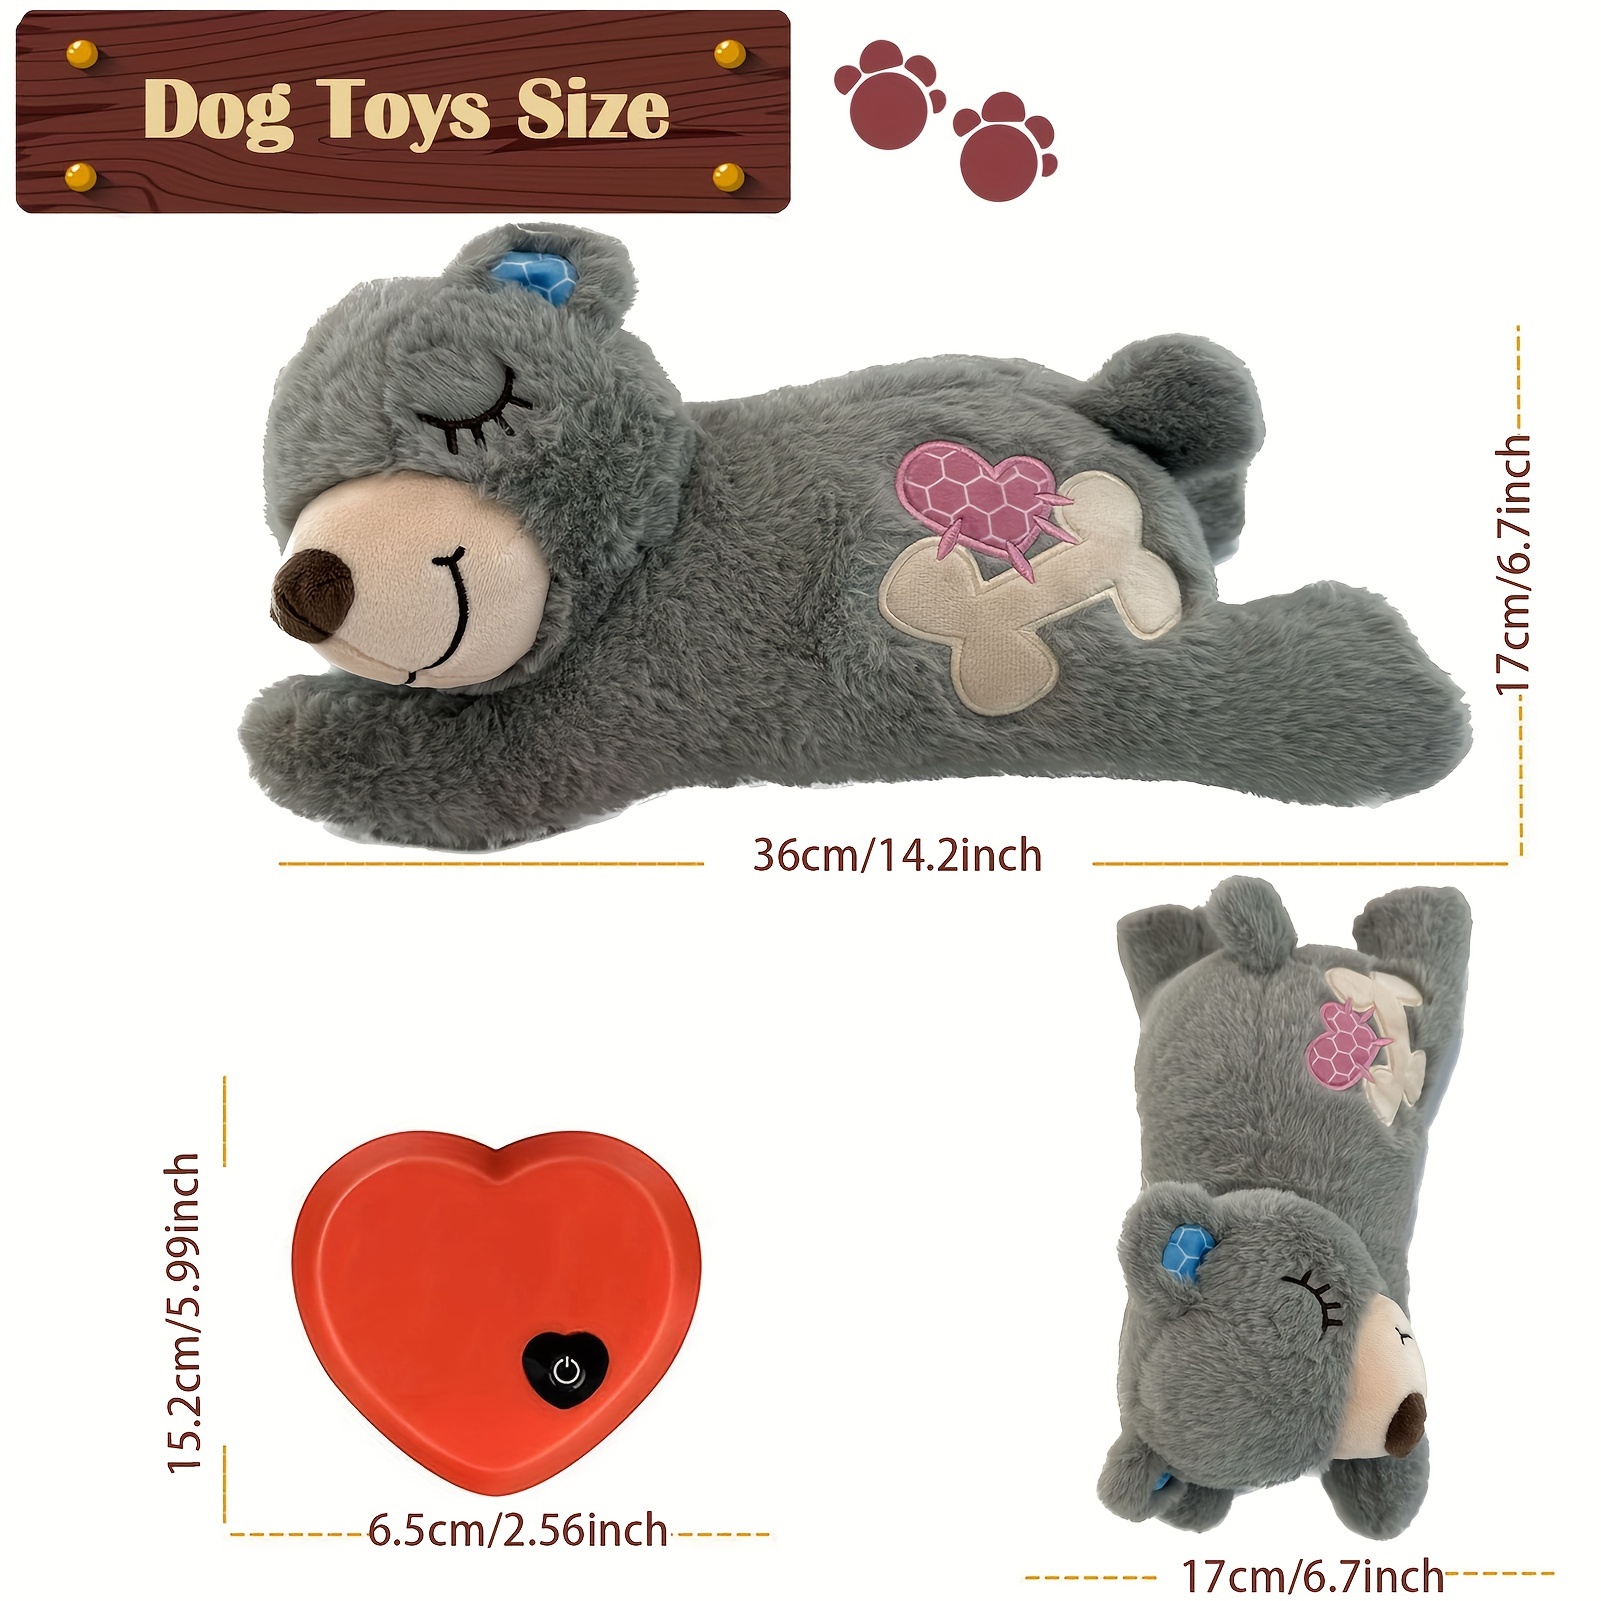 Snuggle Puppy Heartbeat Stuffed Toy for Dogs - Pet Anxiety Relief